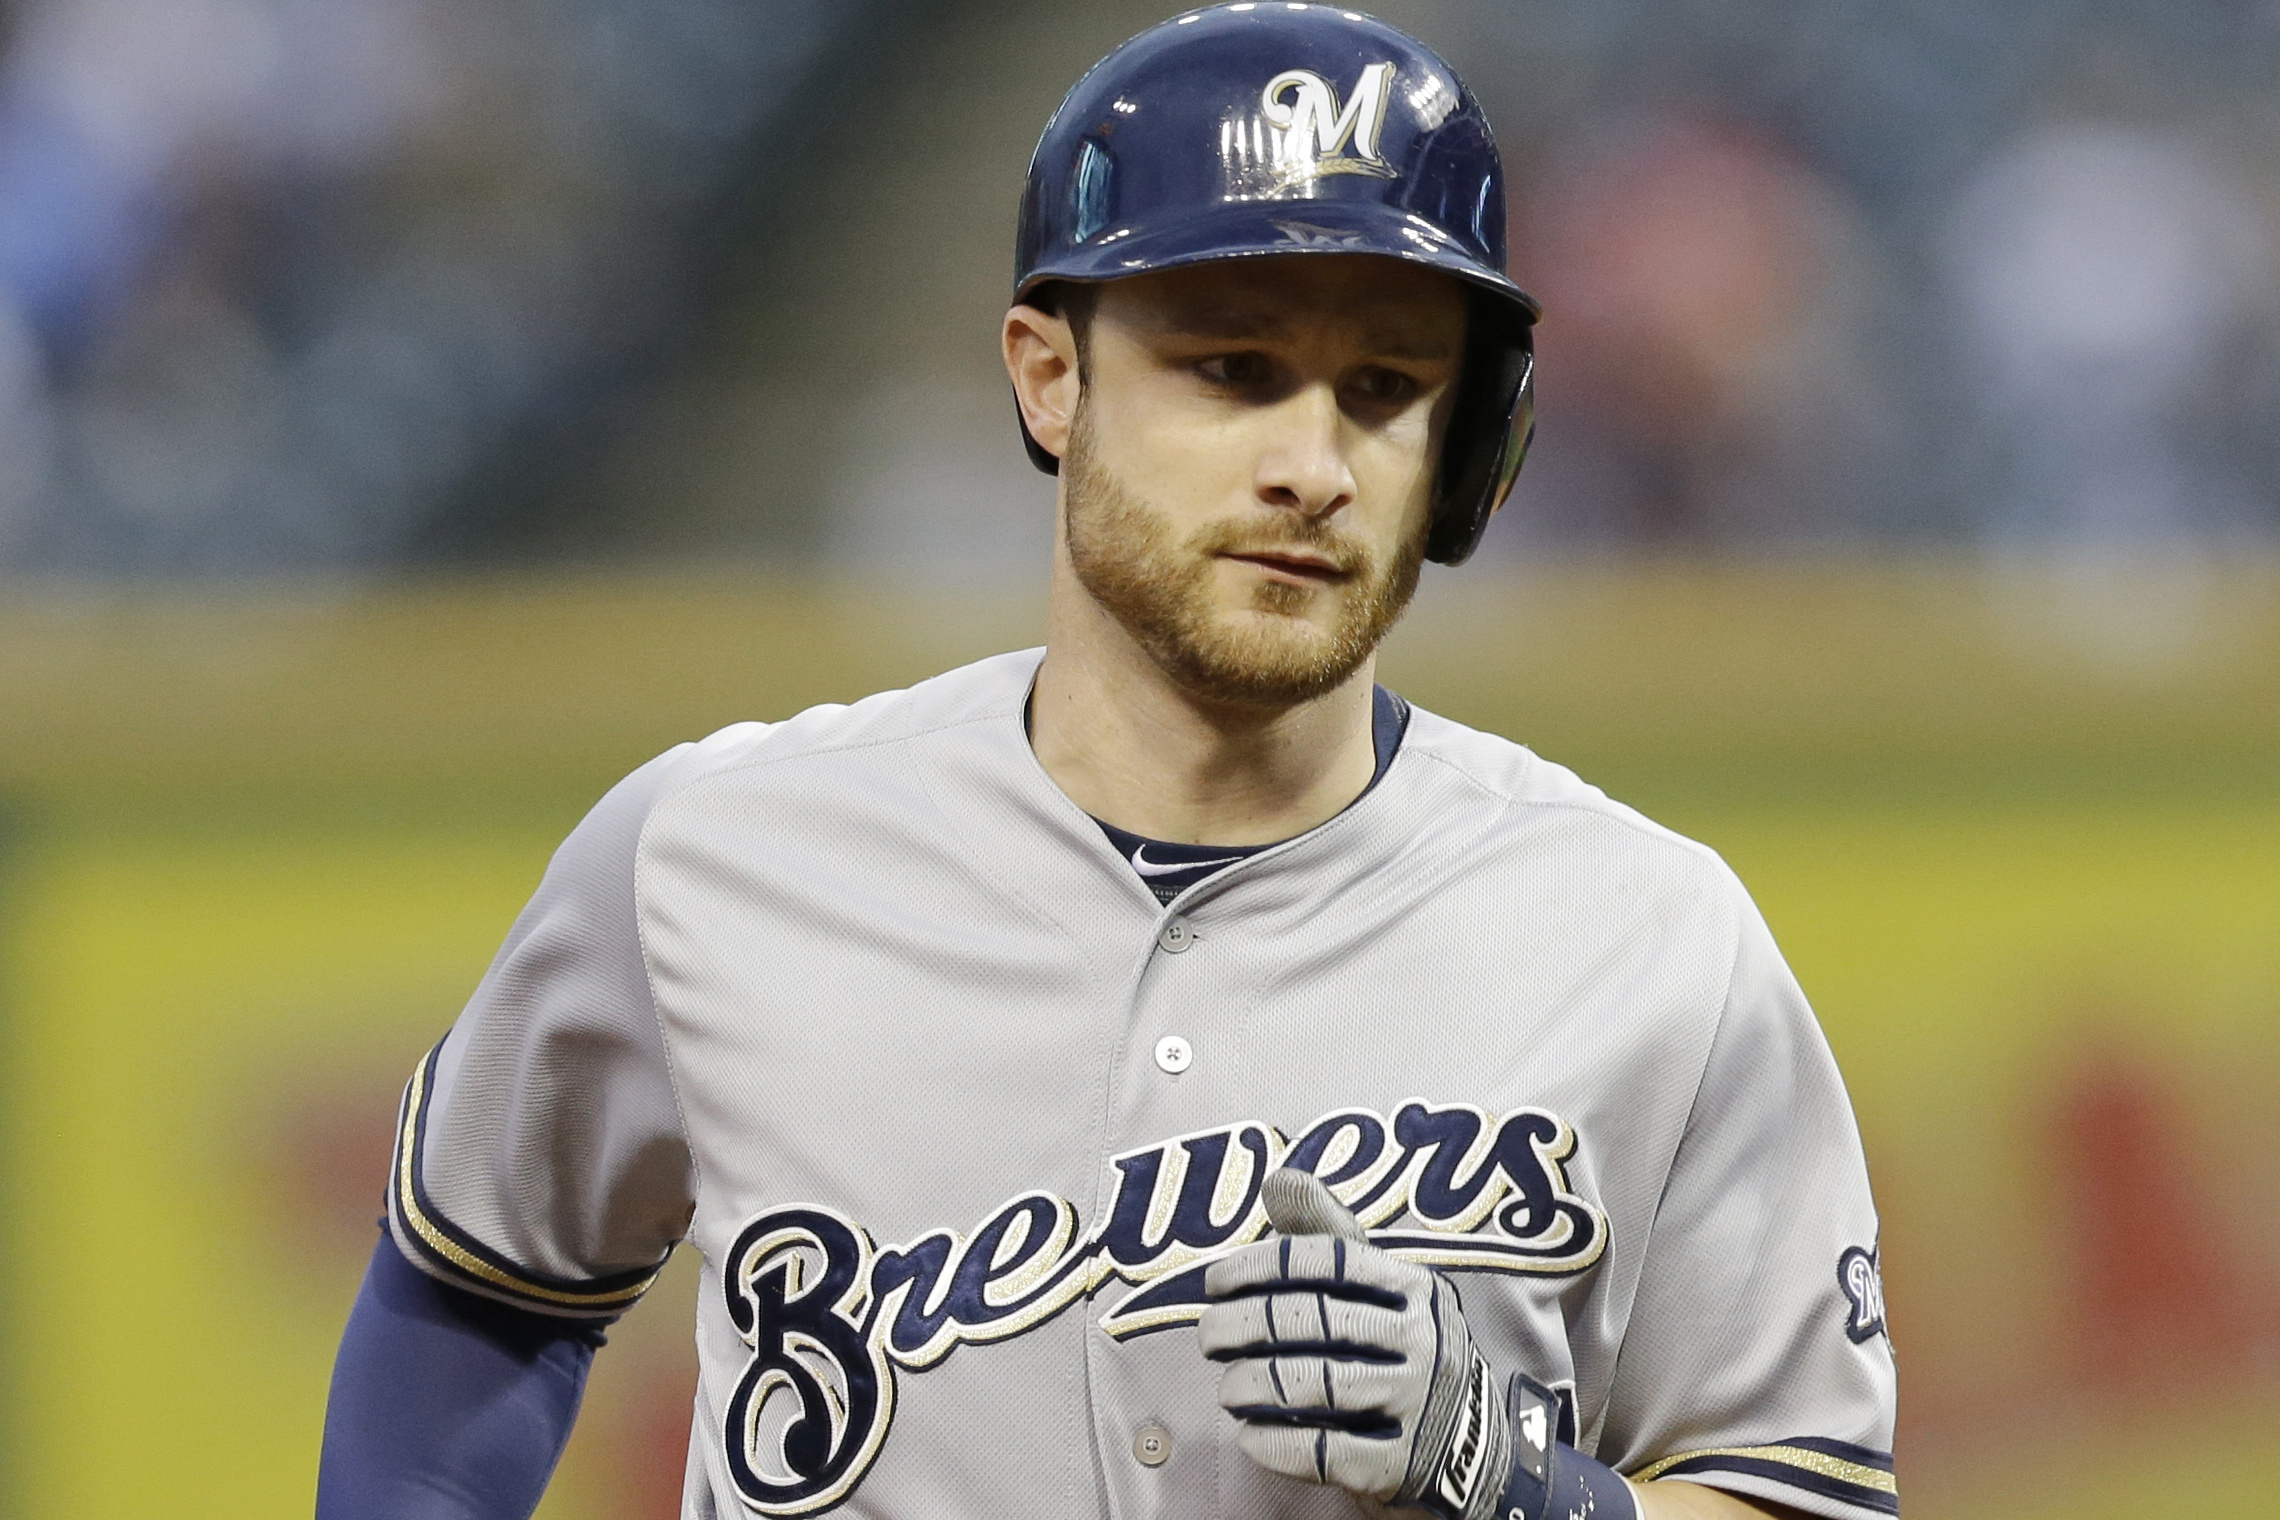 Jonathan Lucroy shines in all-star debut